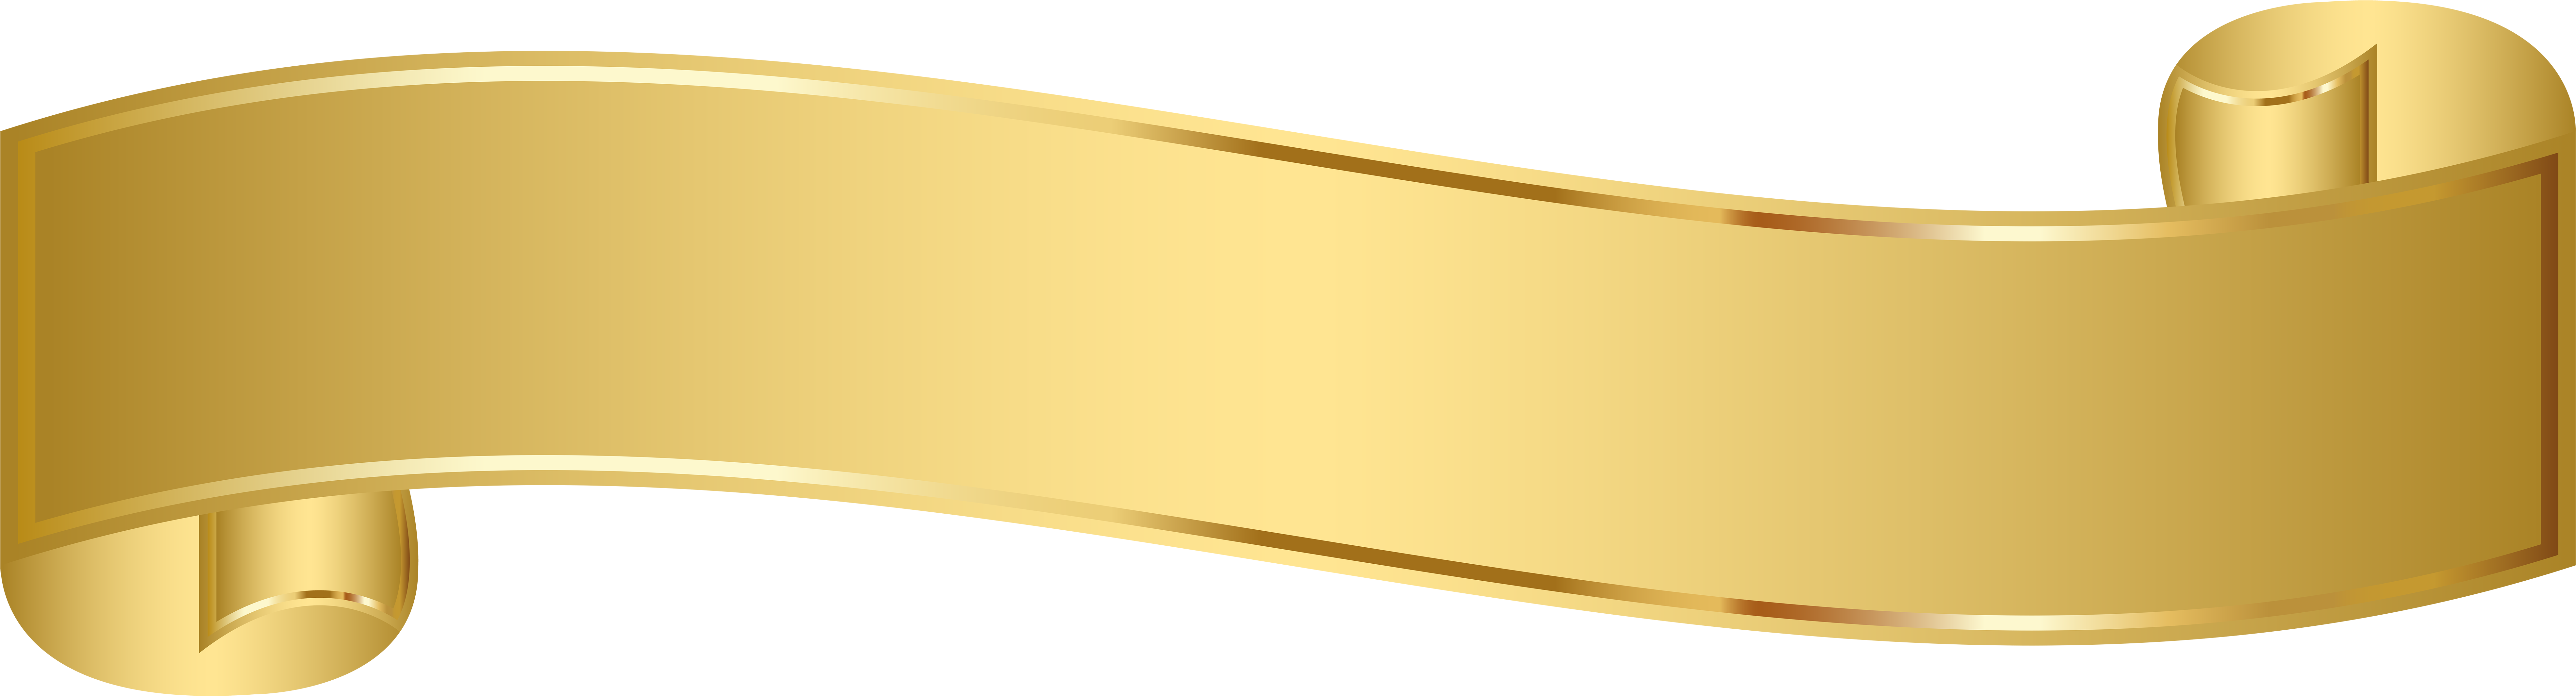 Gold Banner Png 7883 X 2130